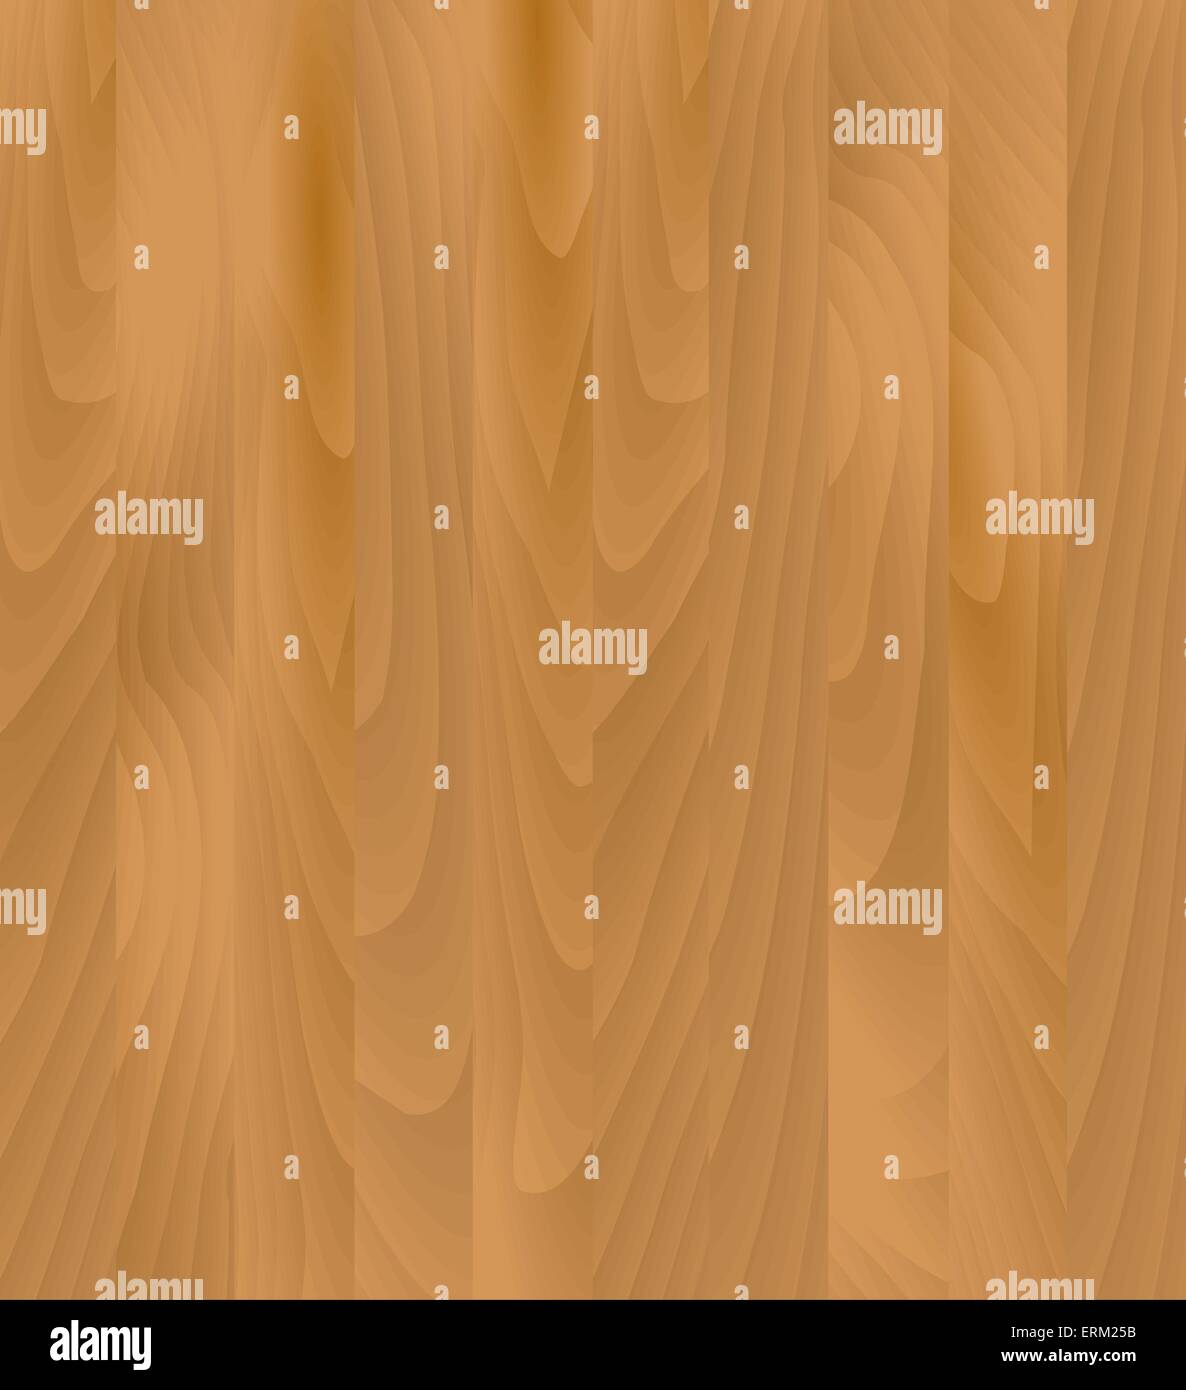 Vector illustration of the wood - wooden texture Stock Vector